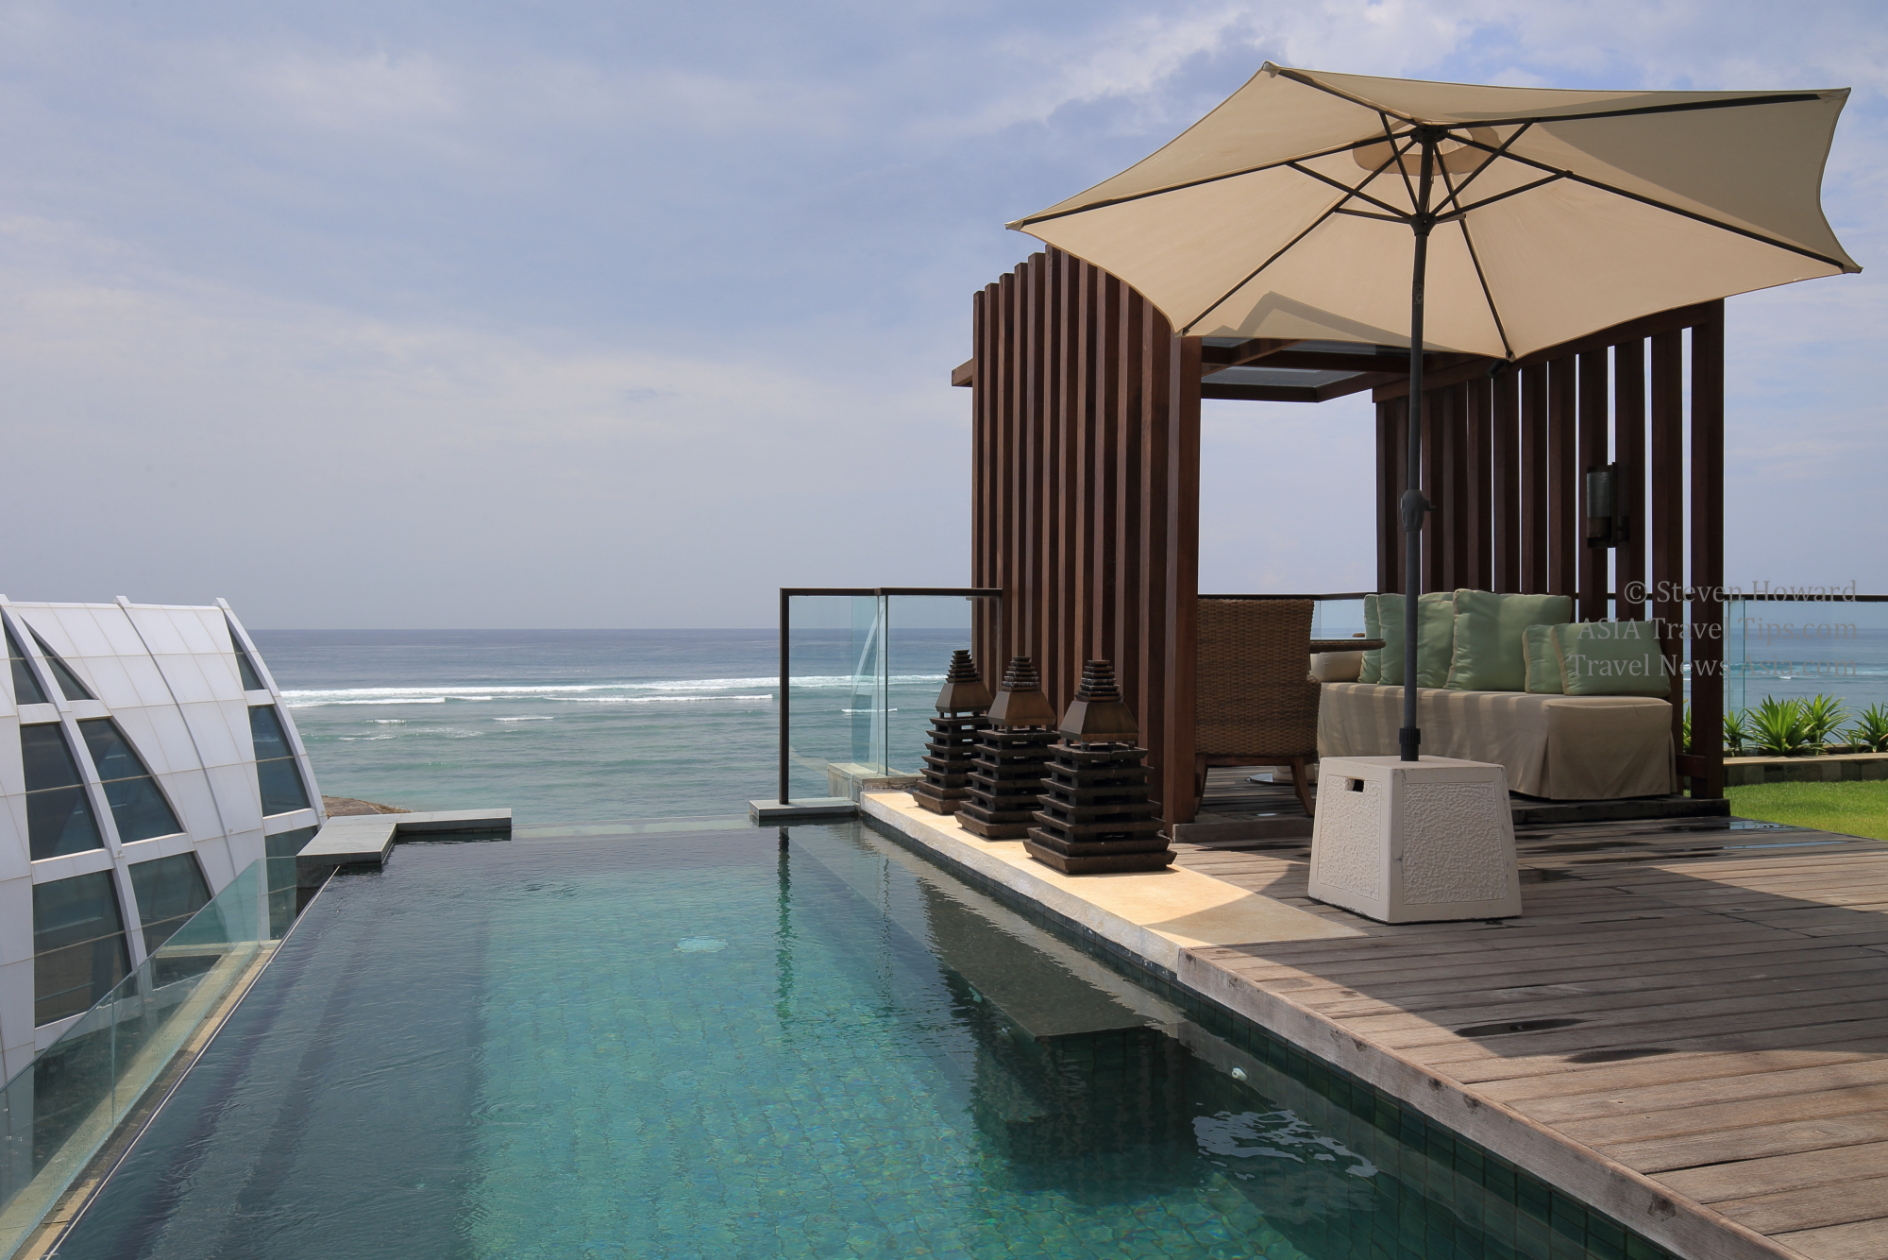 Luxury at The Ritz-Carlton, Bali. Picture by Steven Howard of TravelNewsAsia.com Click to enlarge.